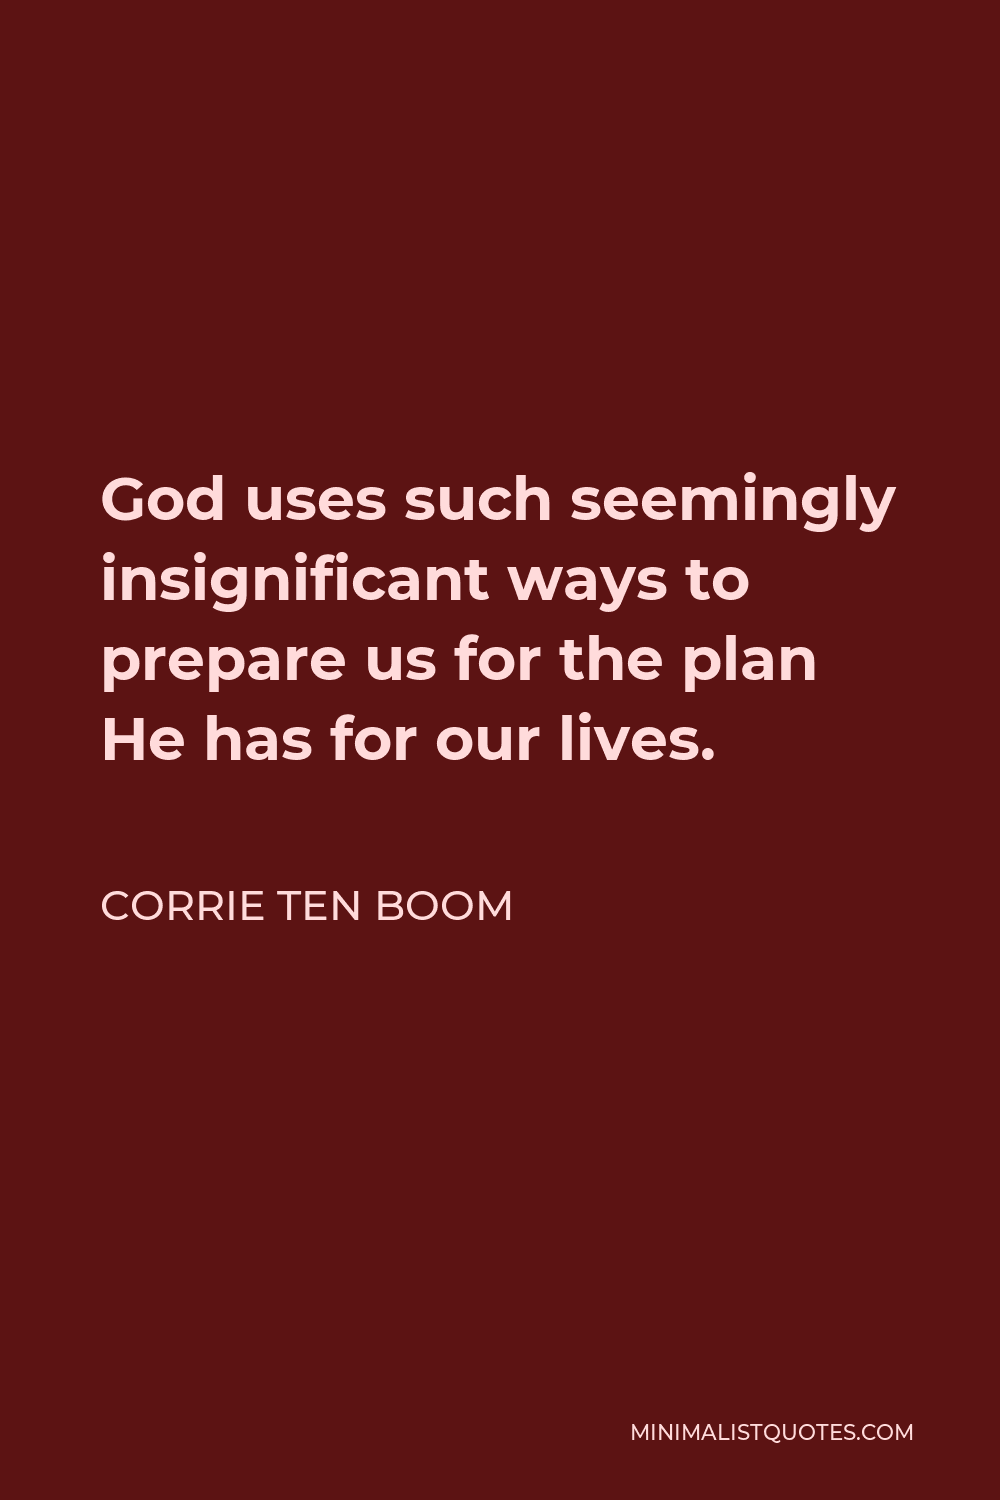 Corrie ten Boom Quote - God uses such seemingly insignificant ways to prepare us for the plan He has for our lives.